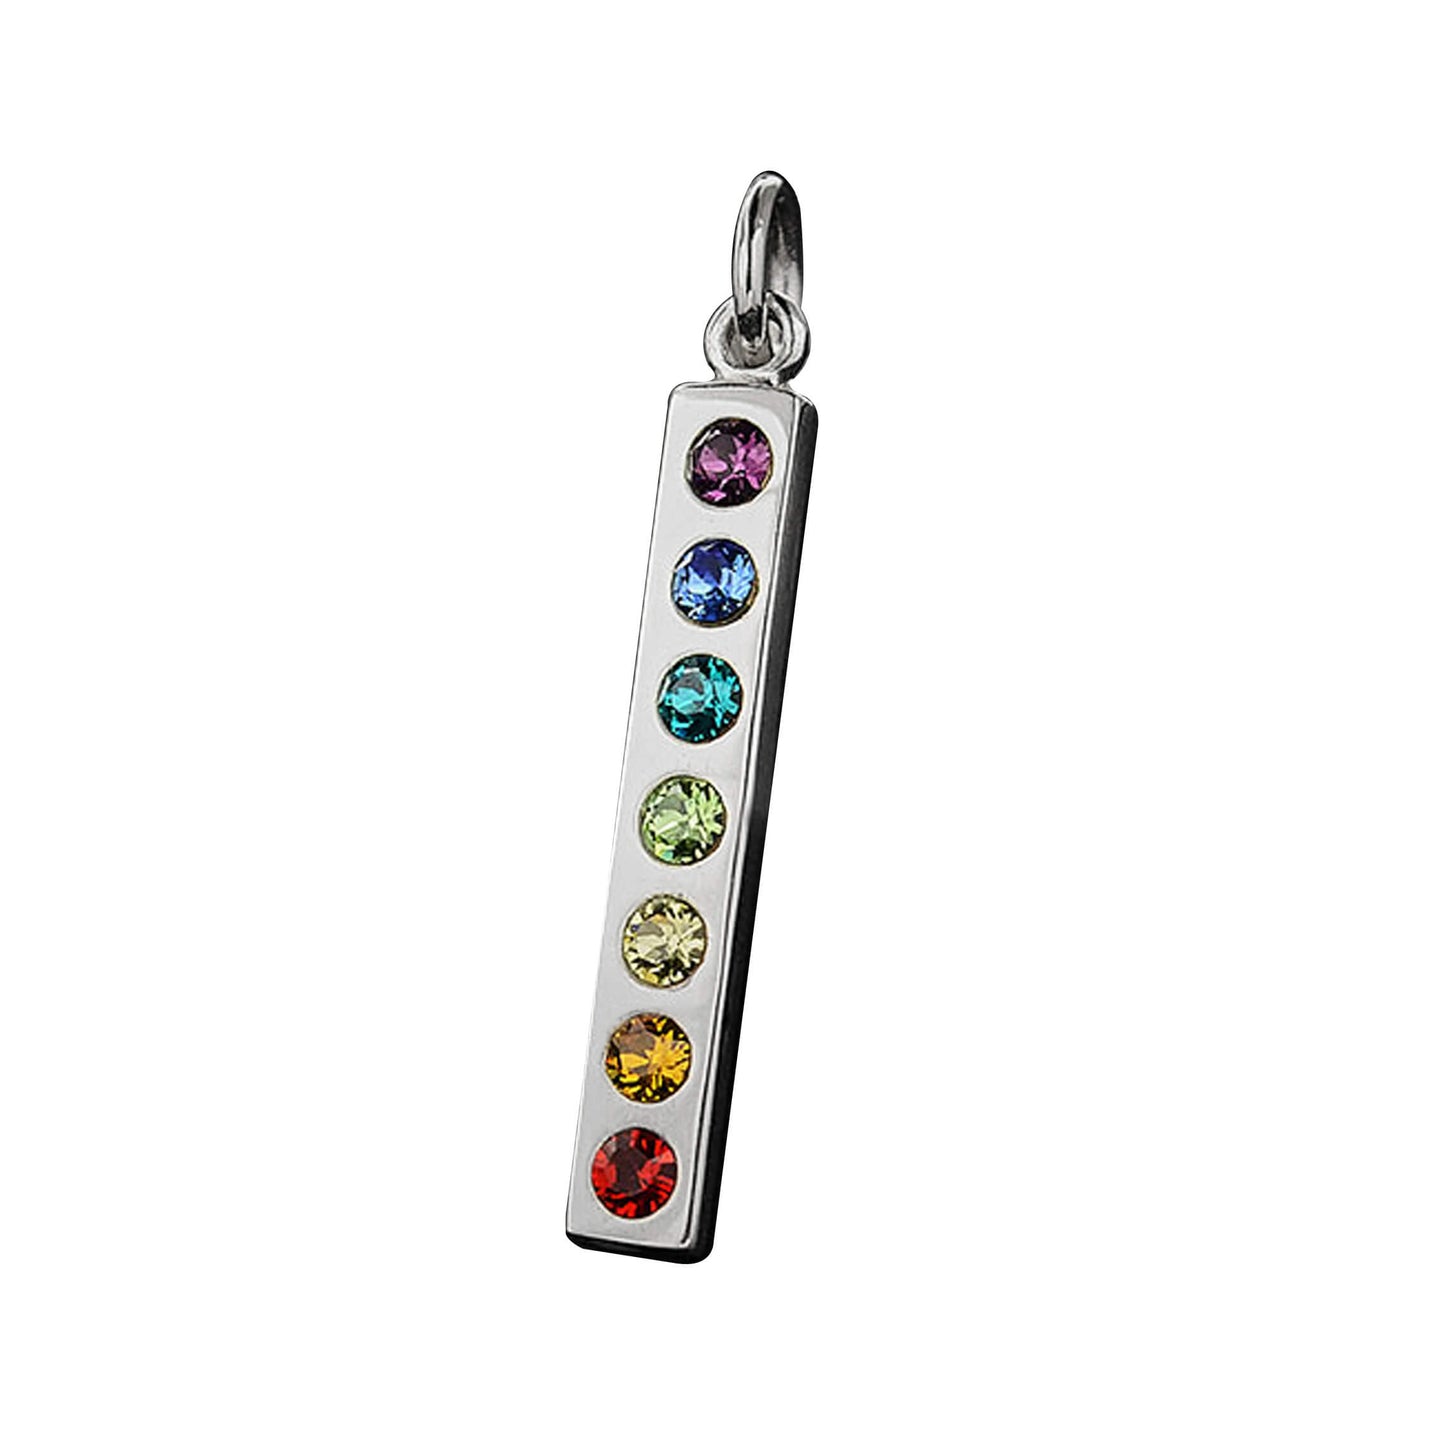 Chakra charm sterling silver and crystal pendant